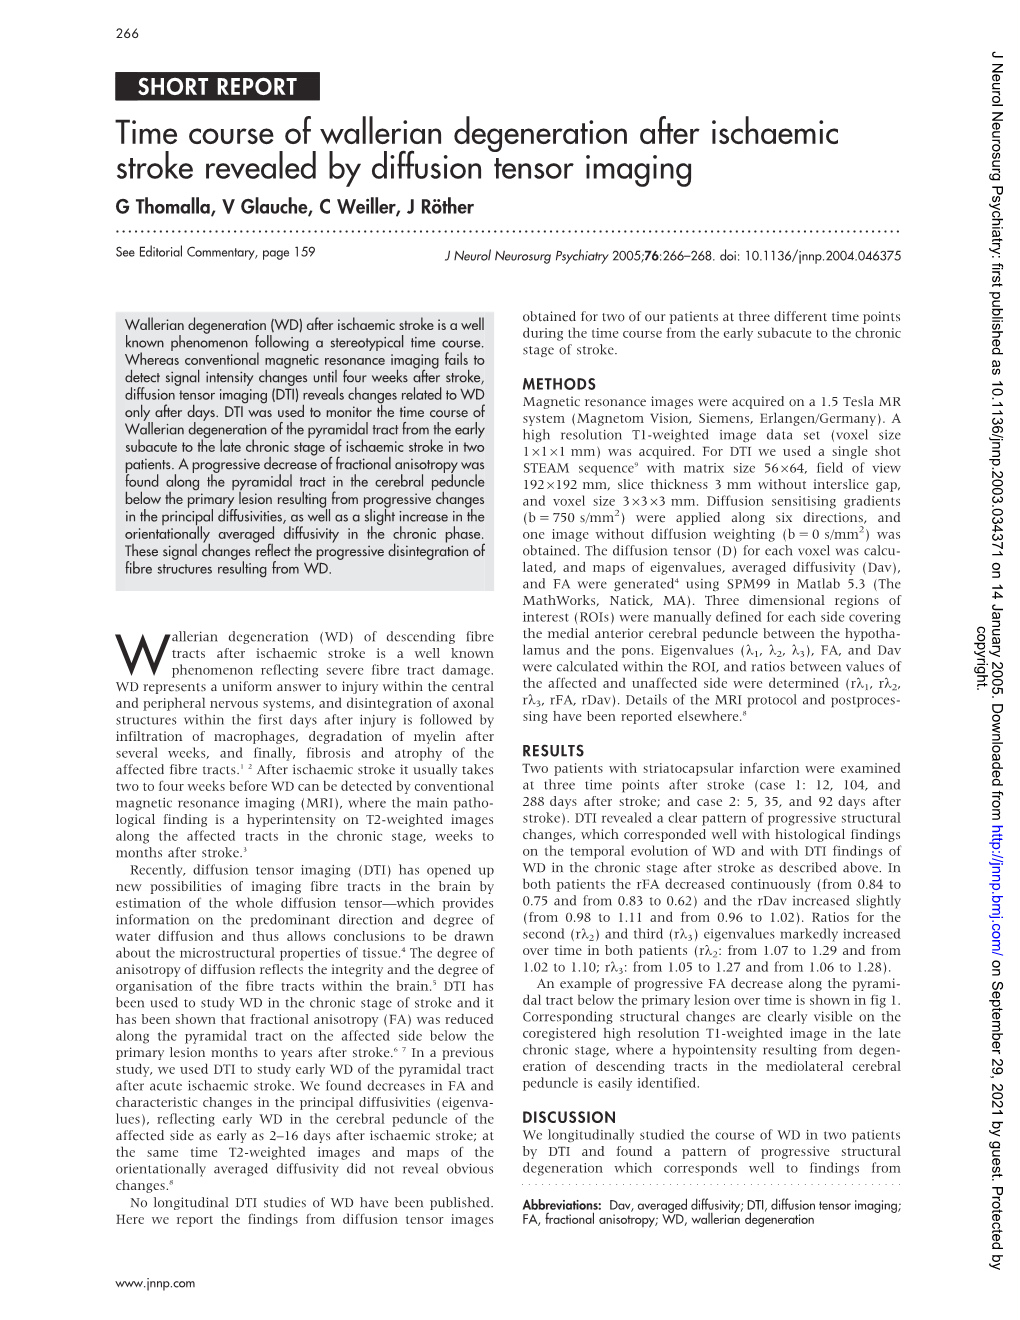 Time Course of Wallerian Degeneration After Ischaemic Stroke Revealed by Diffusion Tensor Imaging G Thomalla, V Glauche, C Weiller, J Ro¨Ther